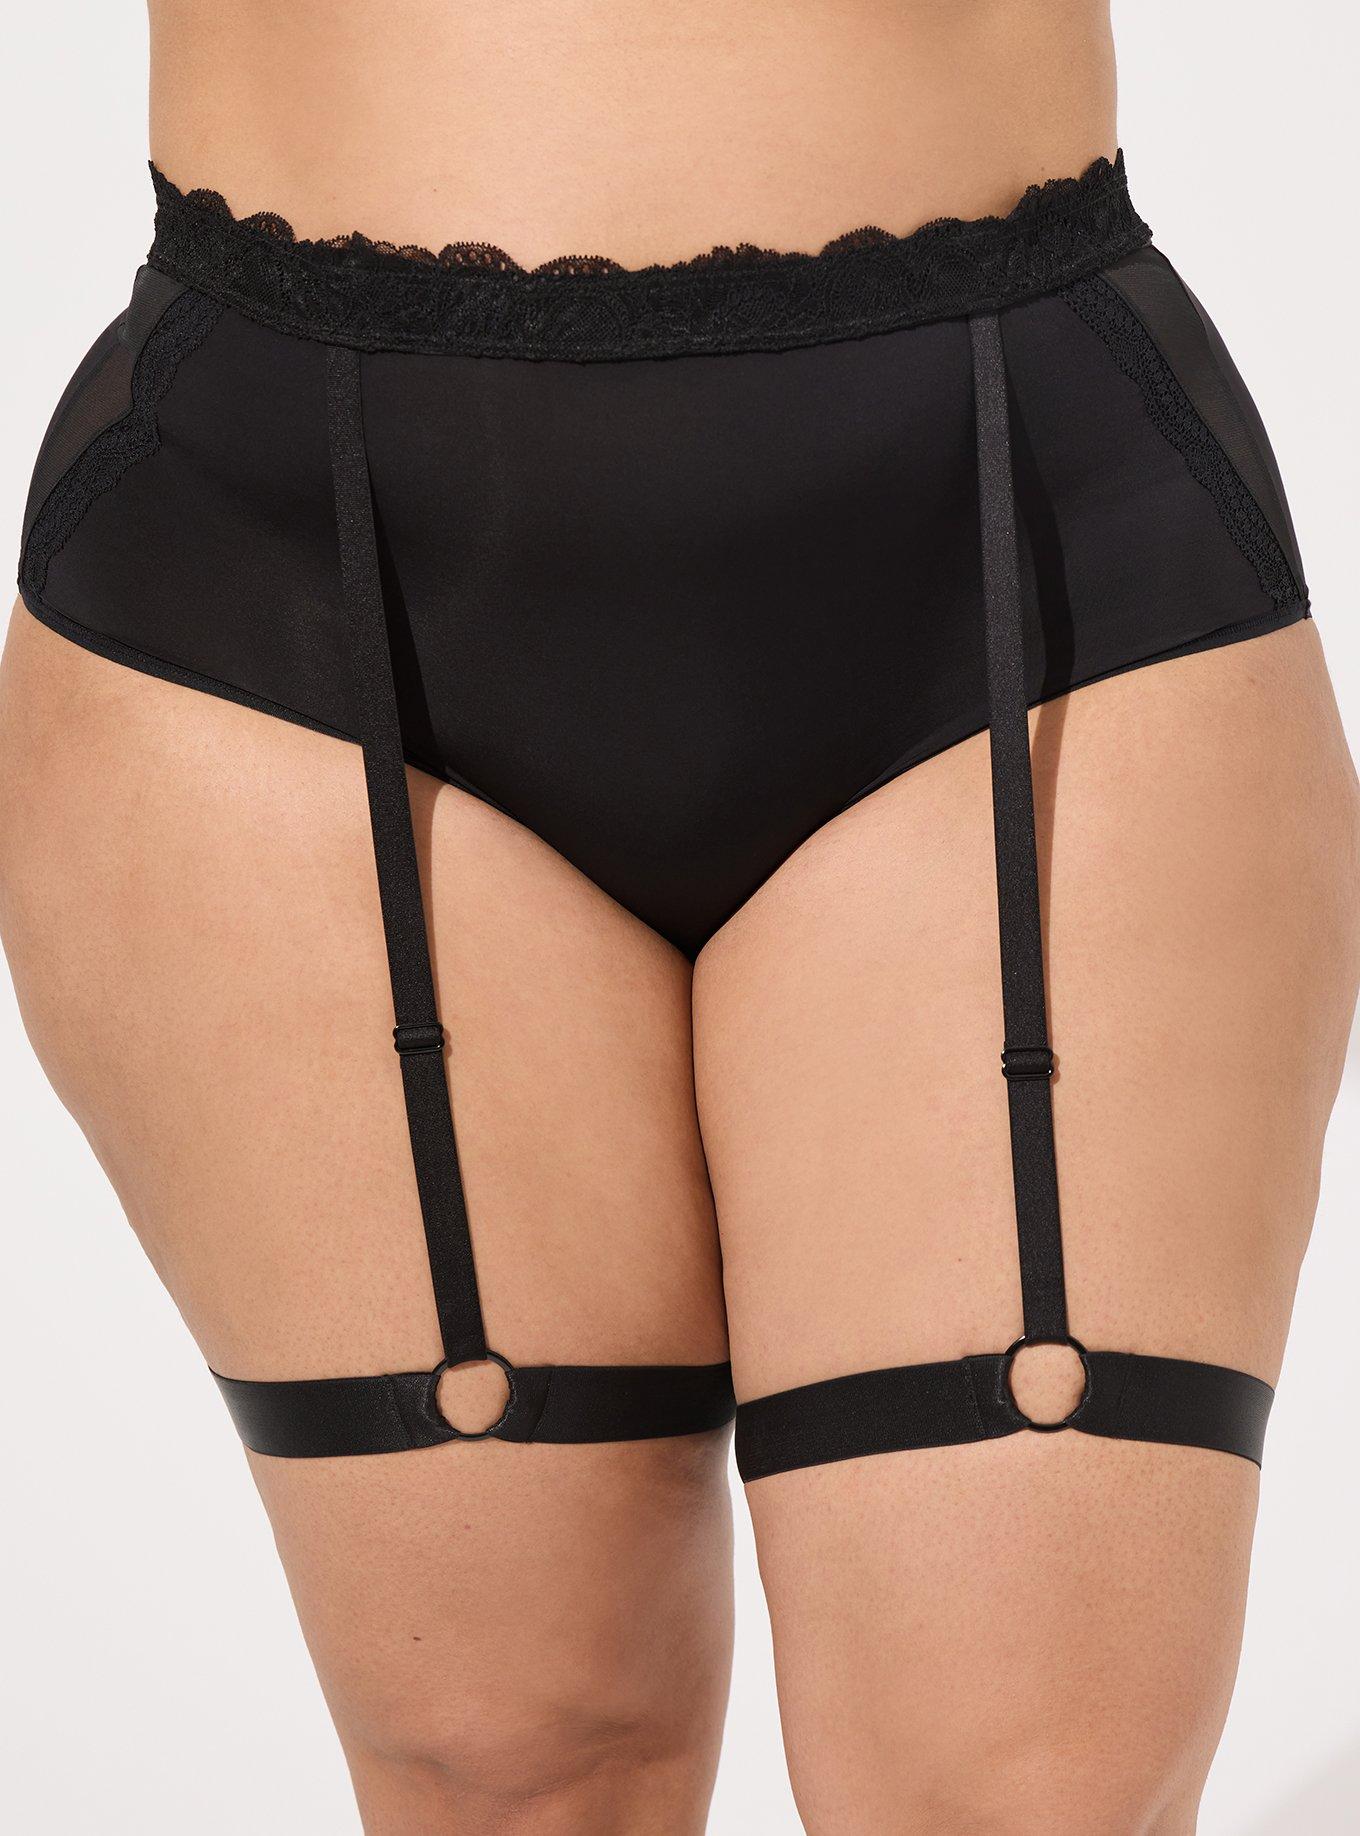 Plus Size - Lace And Elastic Garter Belt with Leg Straps - Torrid